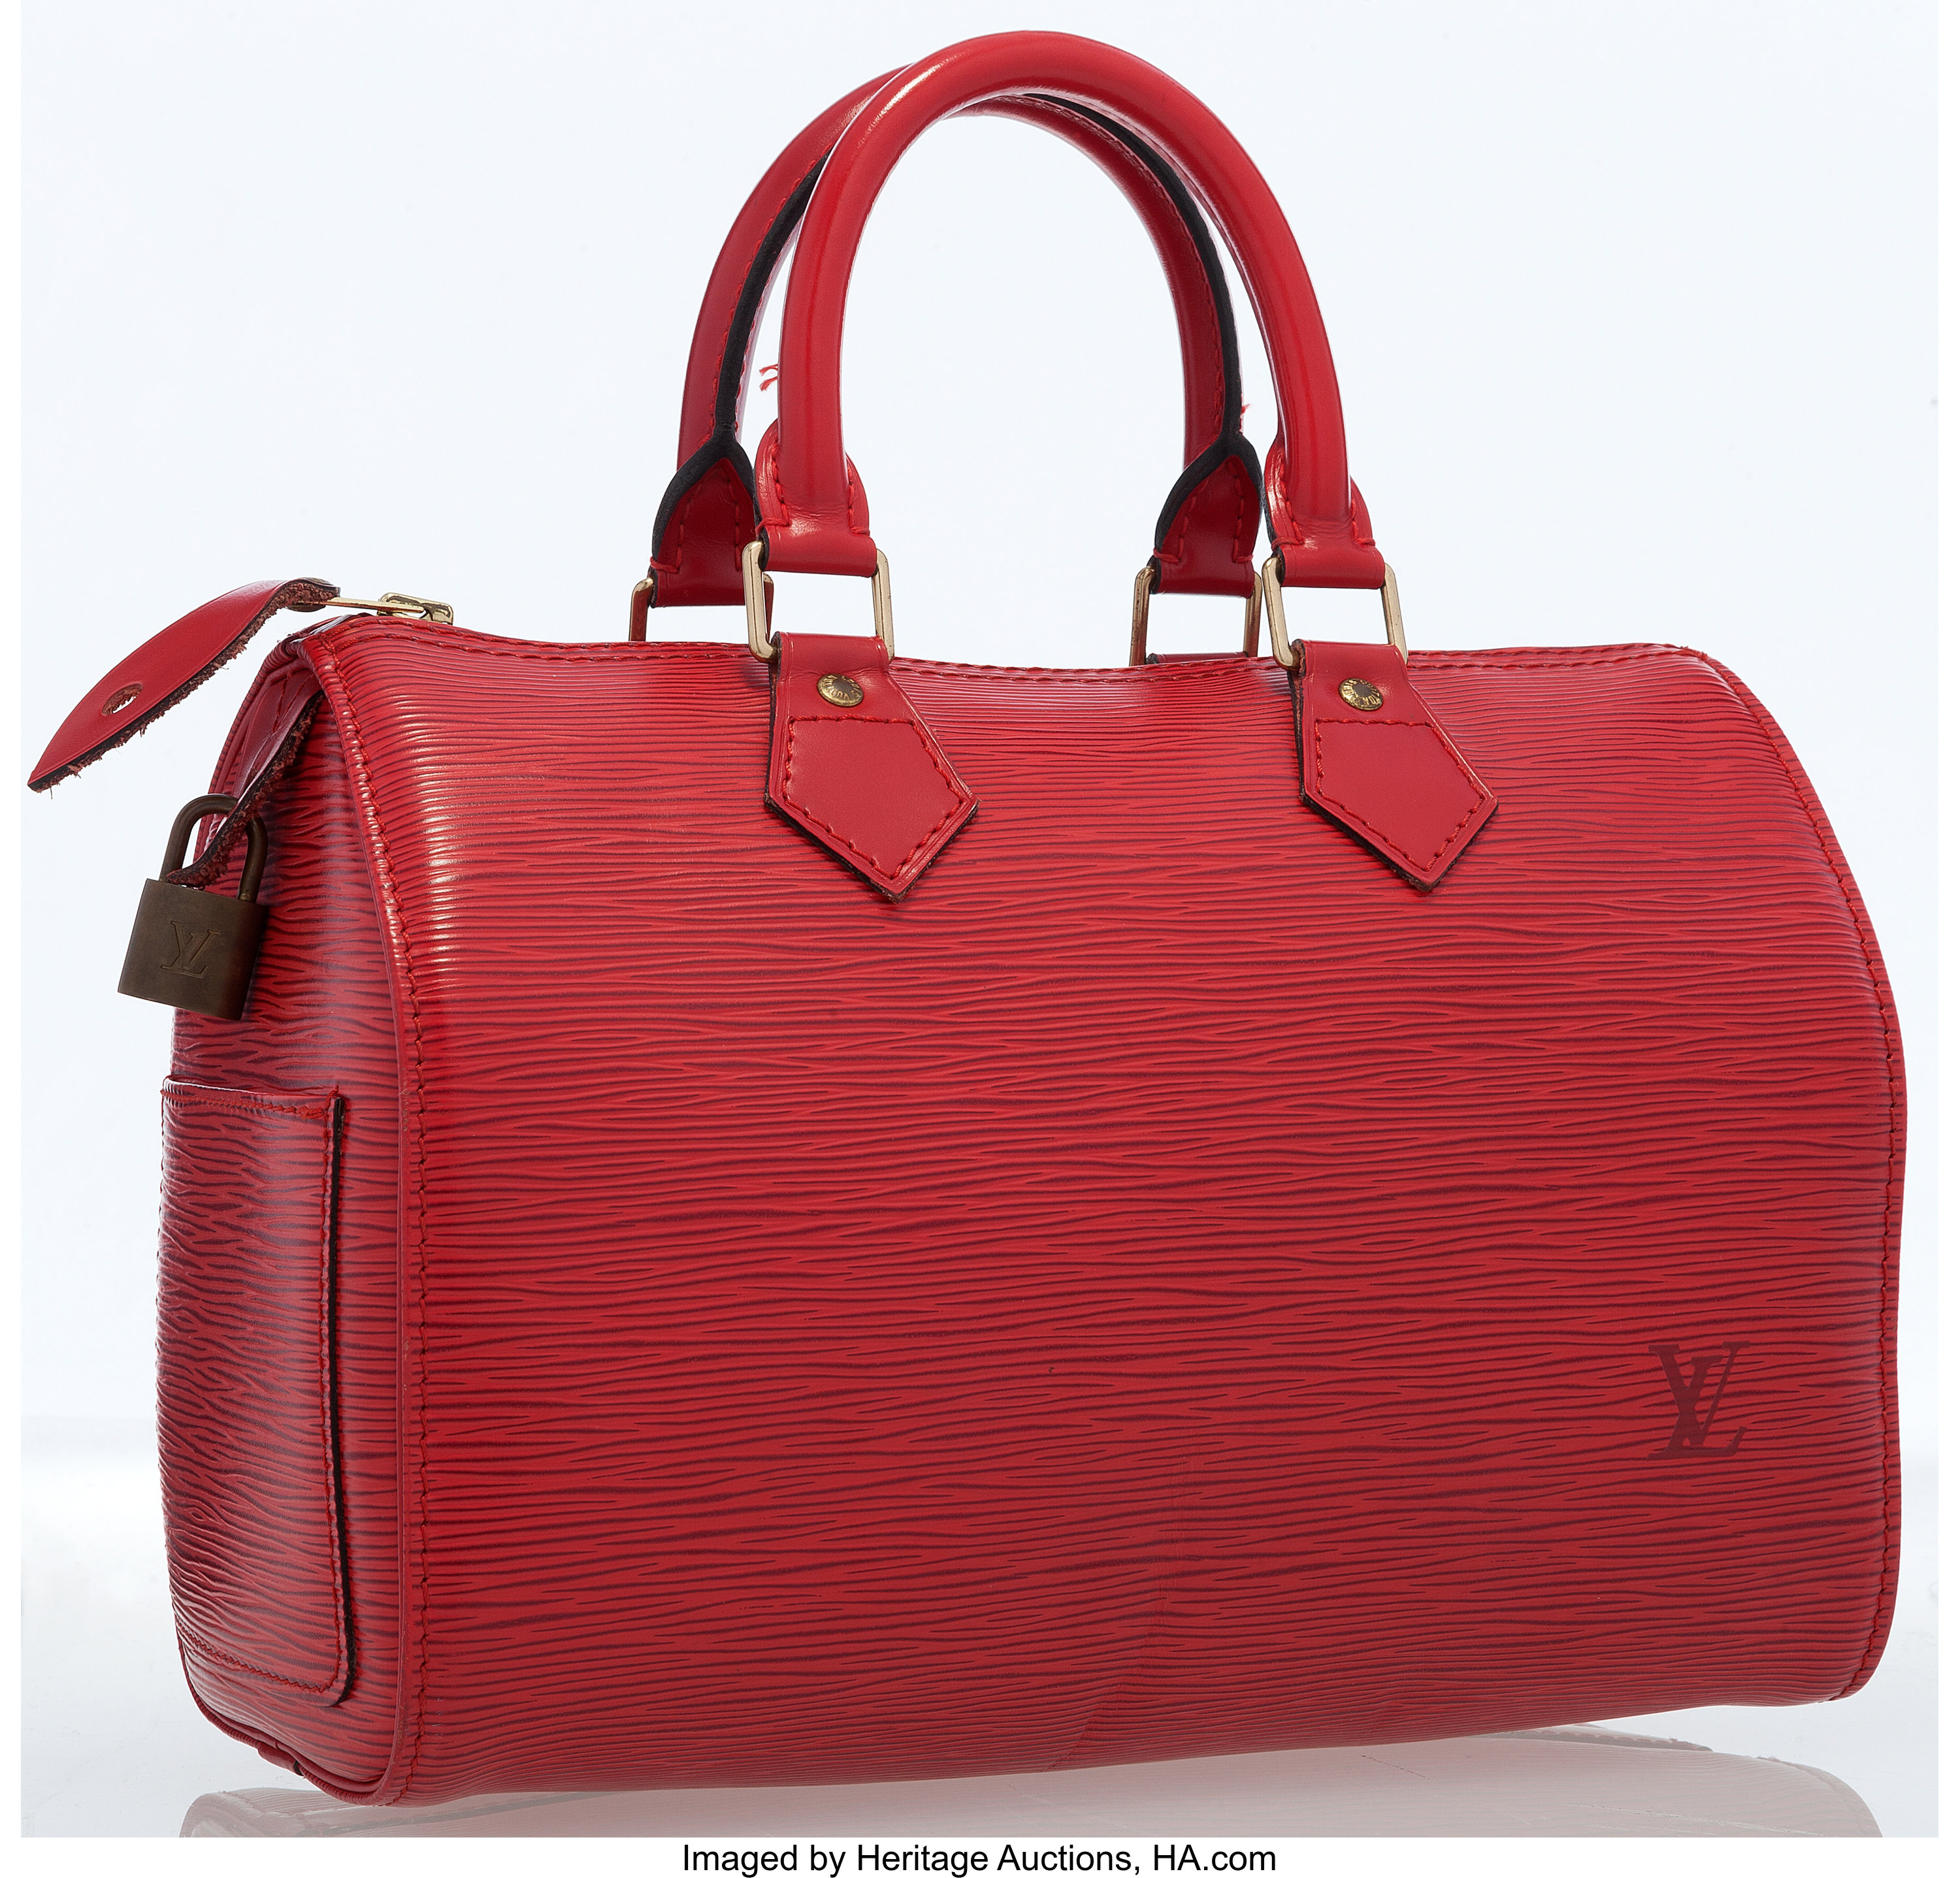 Sold at Auction: Louis Vuitton Vintage Red Epi Leather Speedy 25